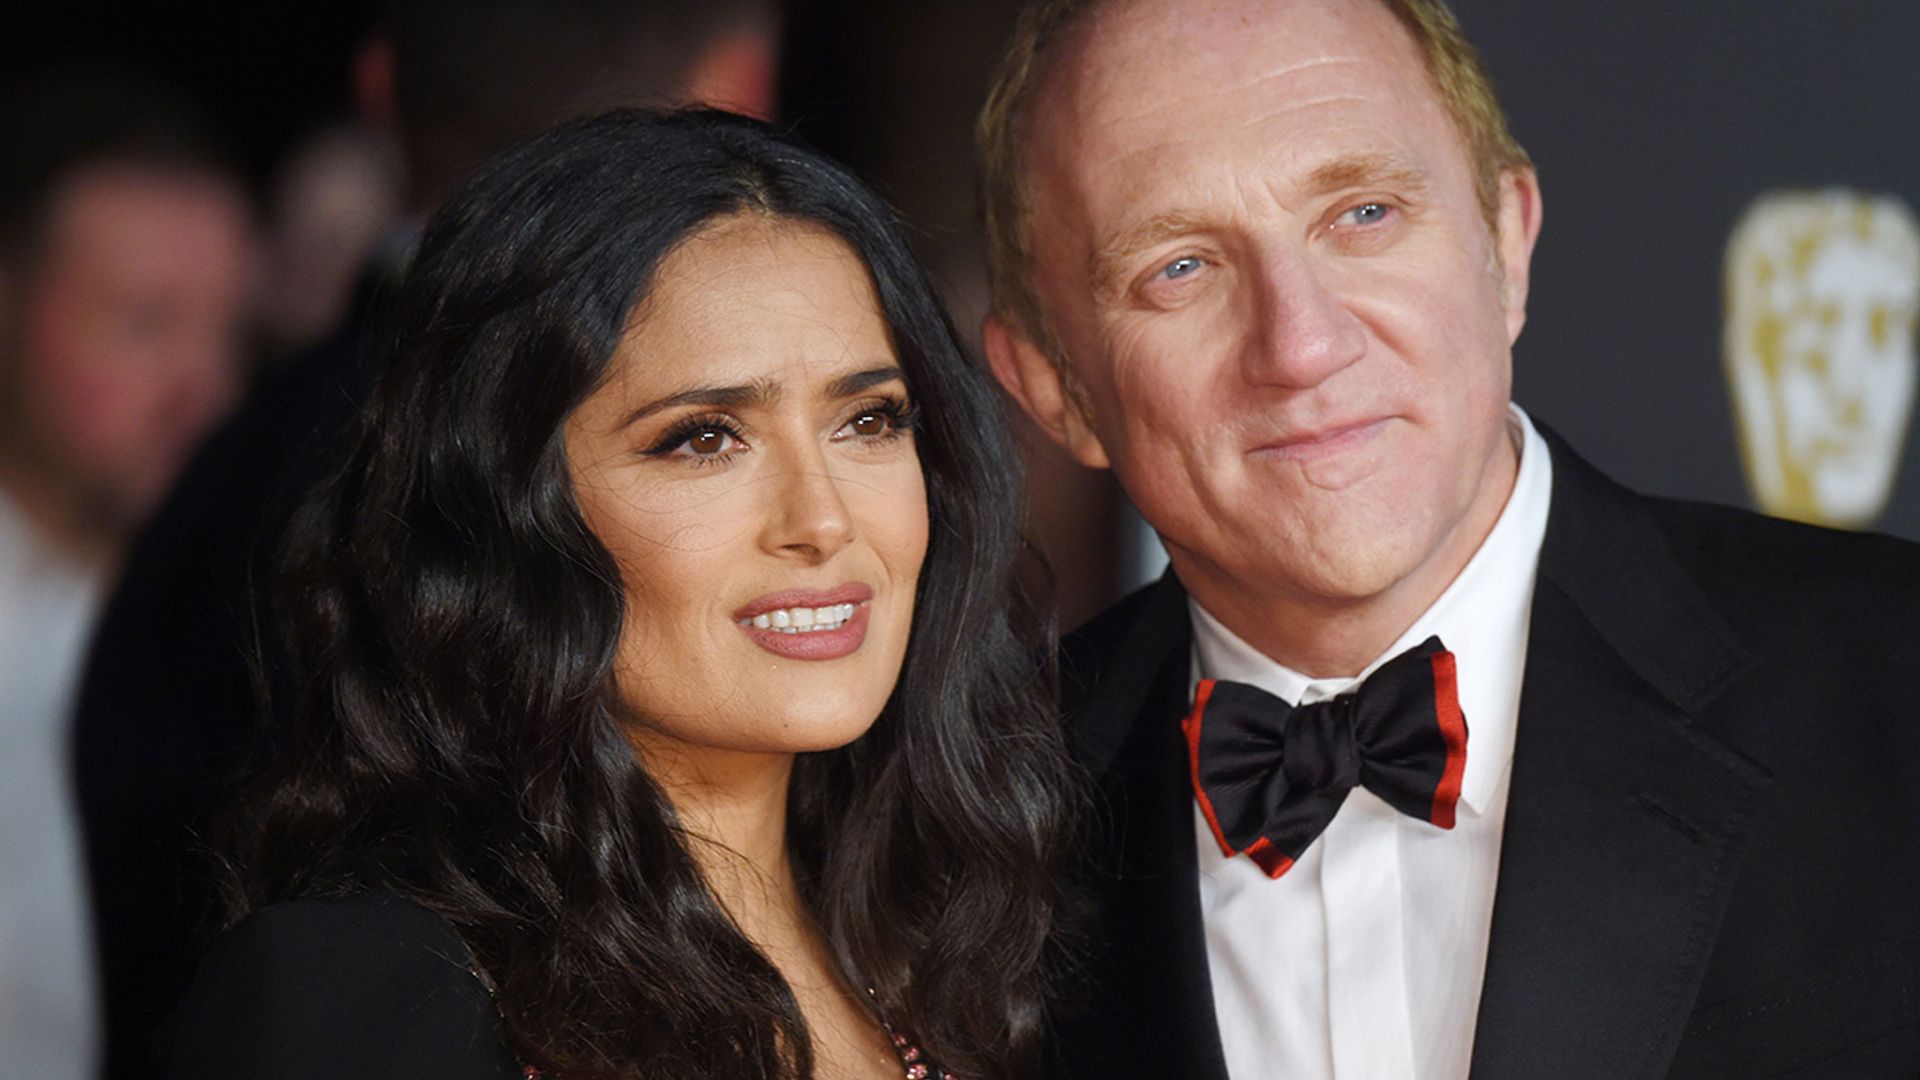 Salma Hayek stuns in intimate photo with husband - but divides her fans